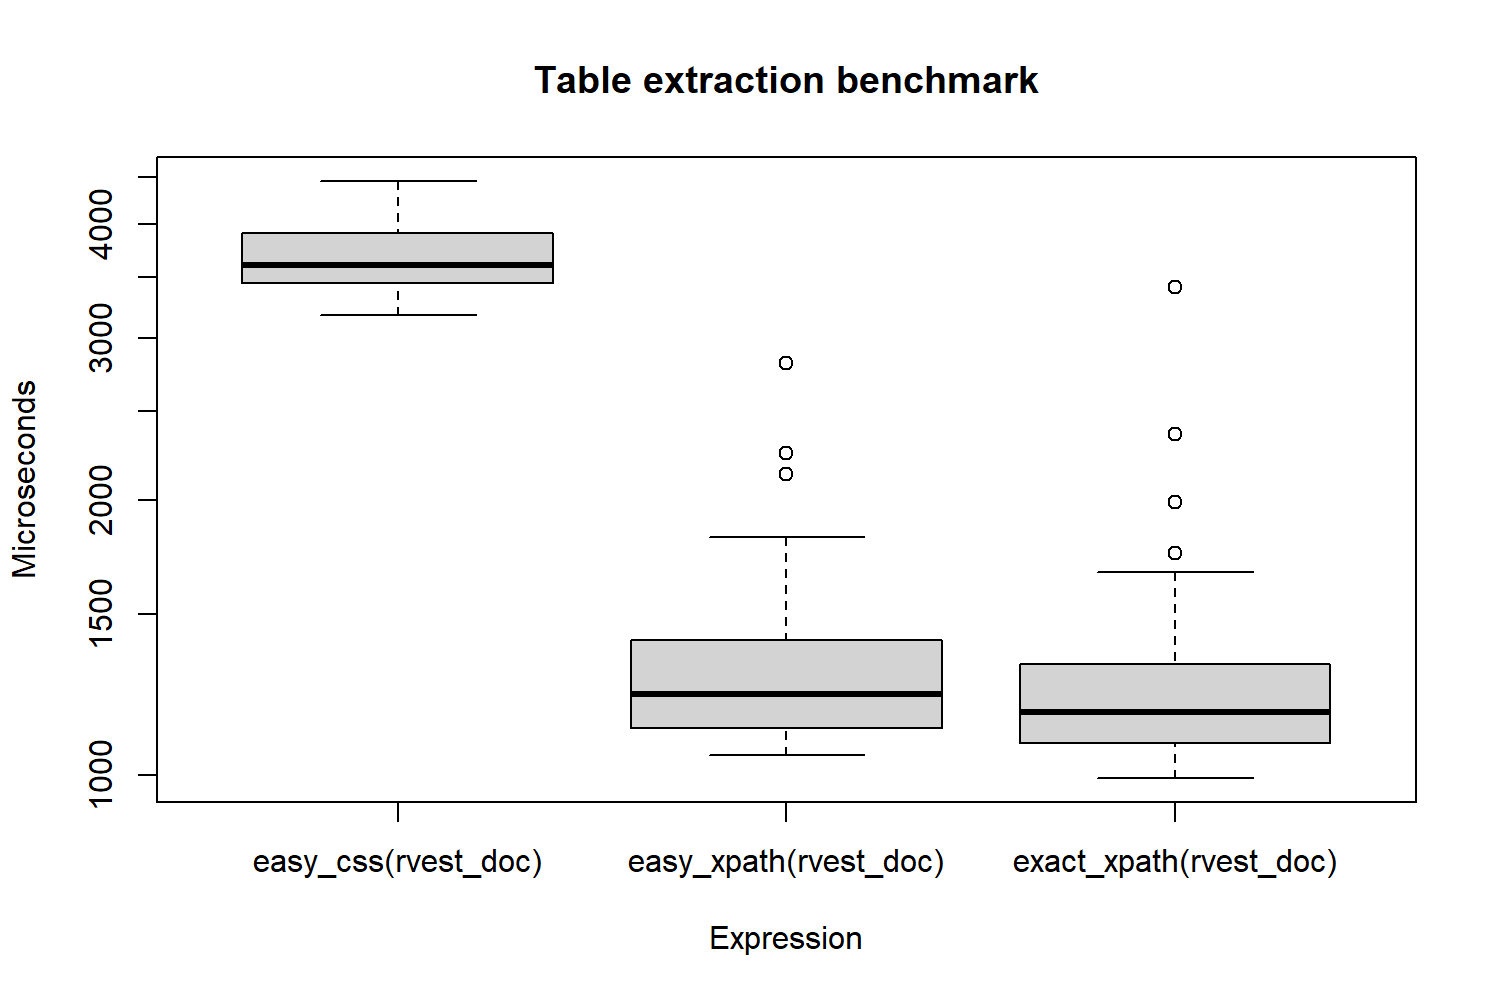 Benchmark of the three table extraction methods